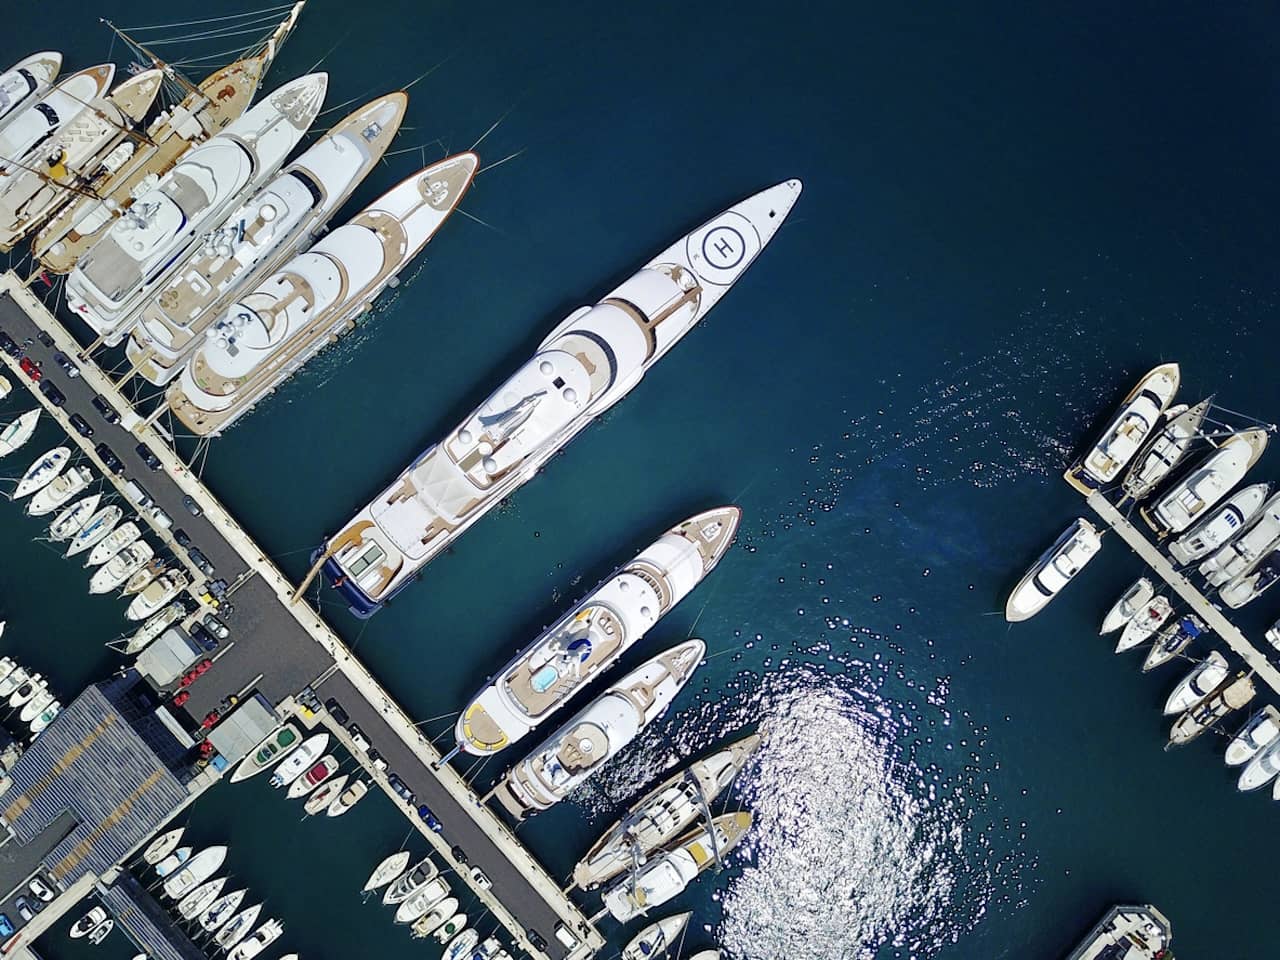 Superyachts vary hugely in size